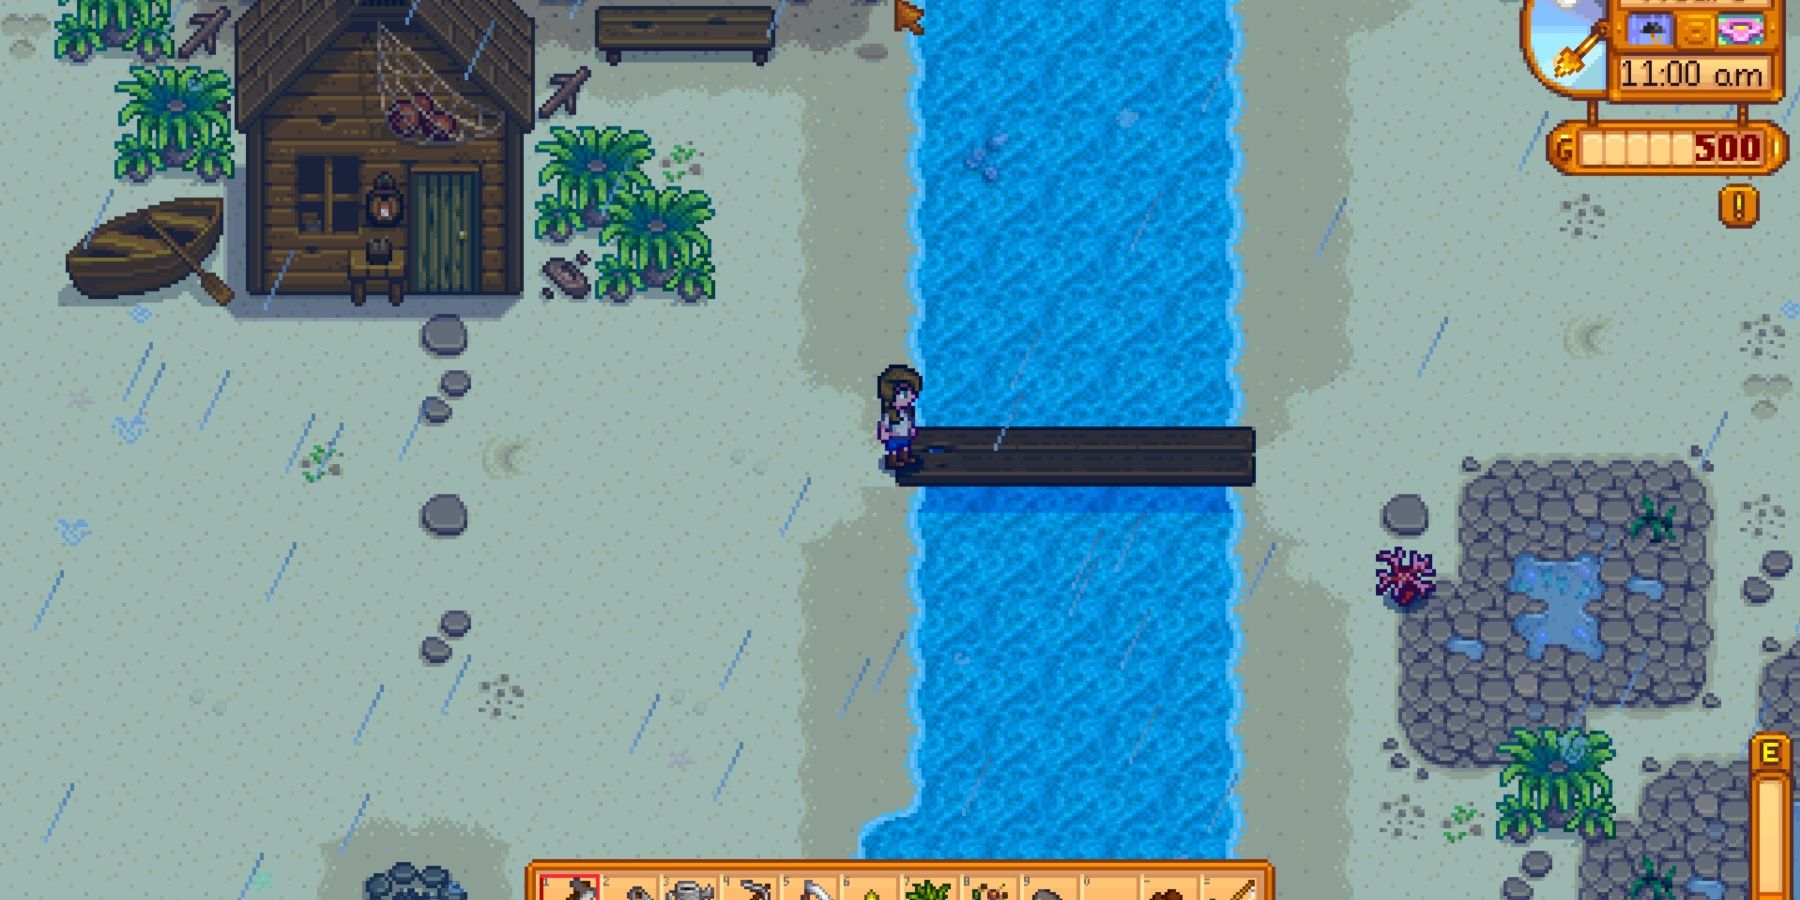 The player standing on the fixed beach bridge while it rains in Stardew Valley